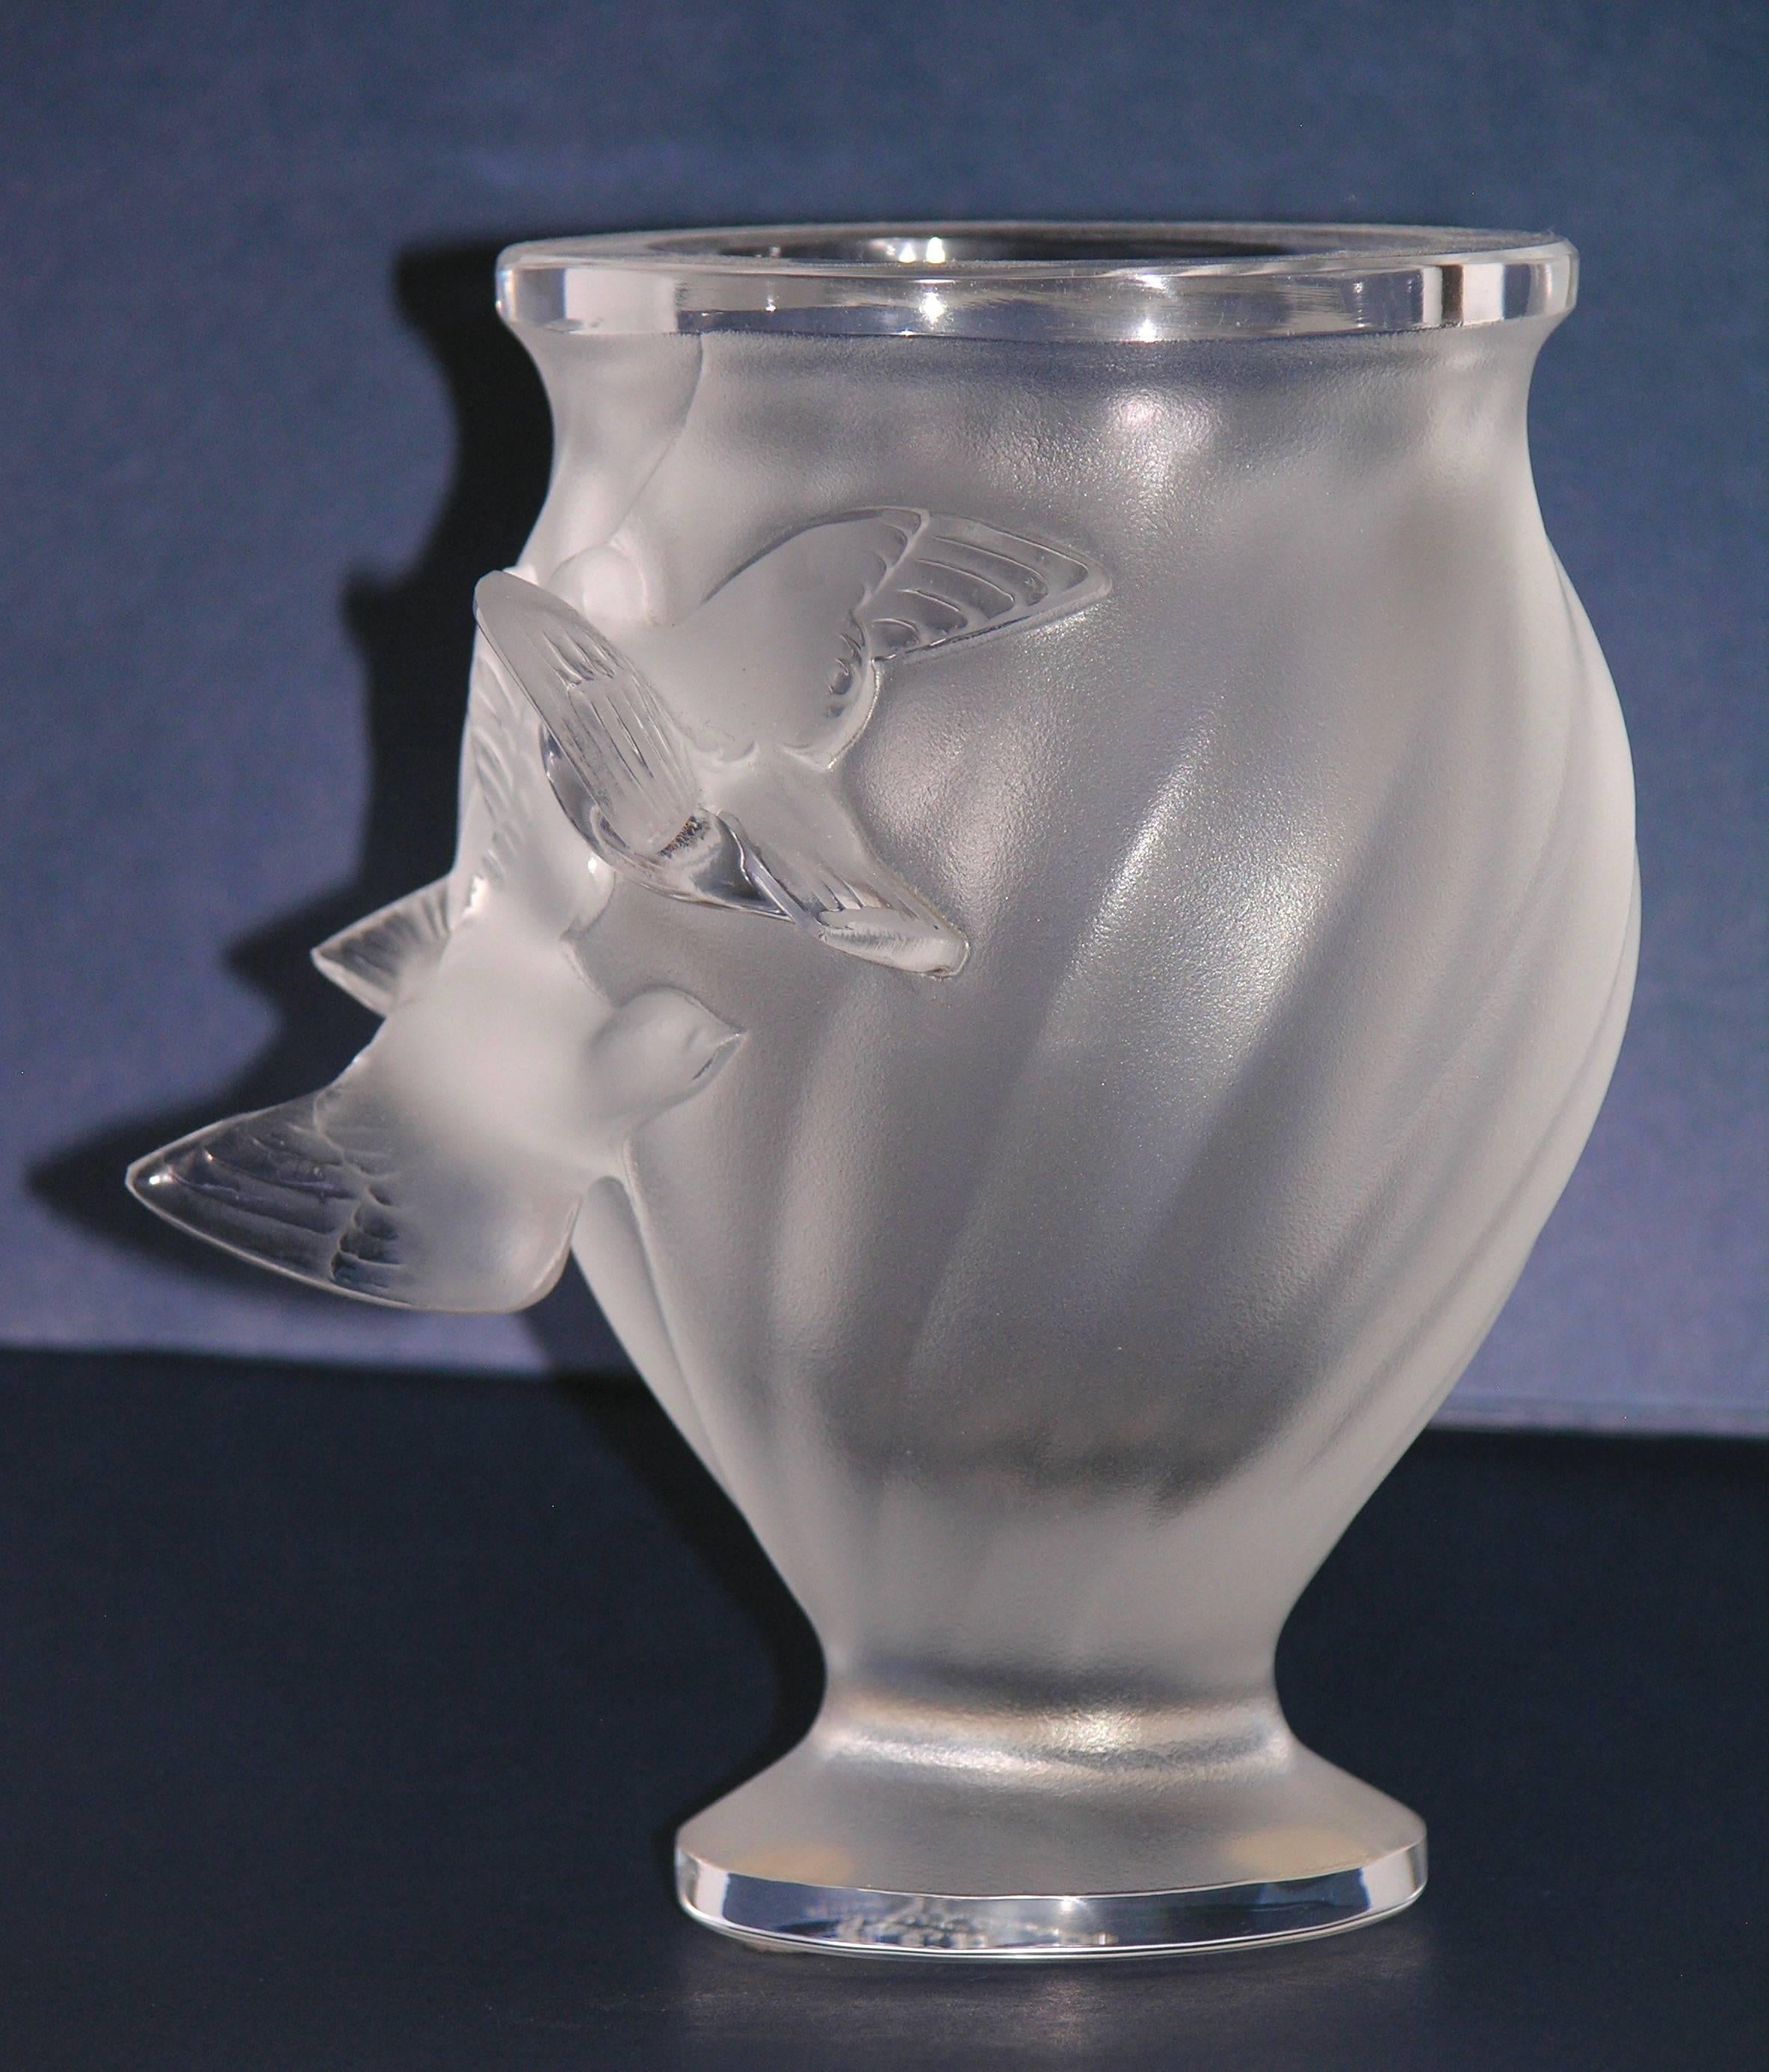 An elegant frosted crystal vase of oval shape by Lalique in the Rosine pattern designed by Marie Lalique in 1950. This vintage piece from the 1950s presents a molded swirl design on the body, decorated in relief with two birds in flight, raised on a